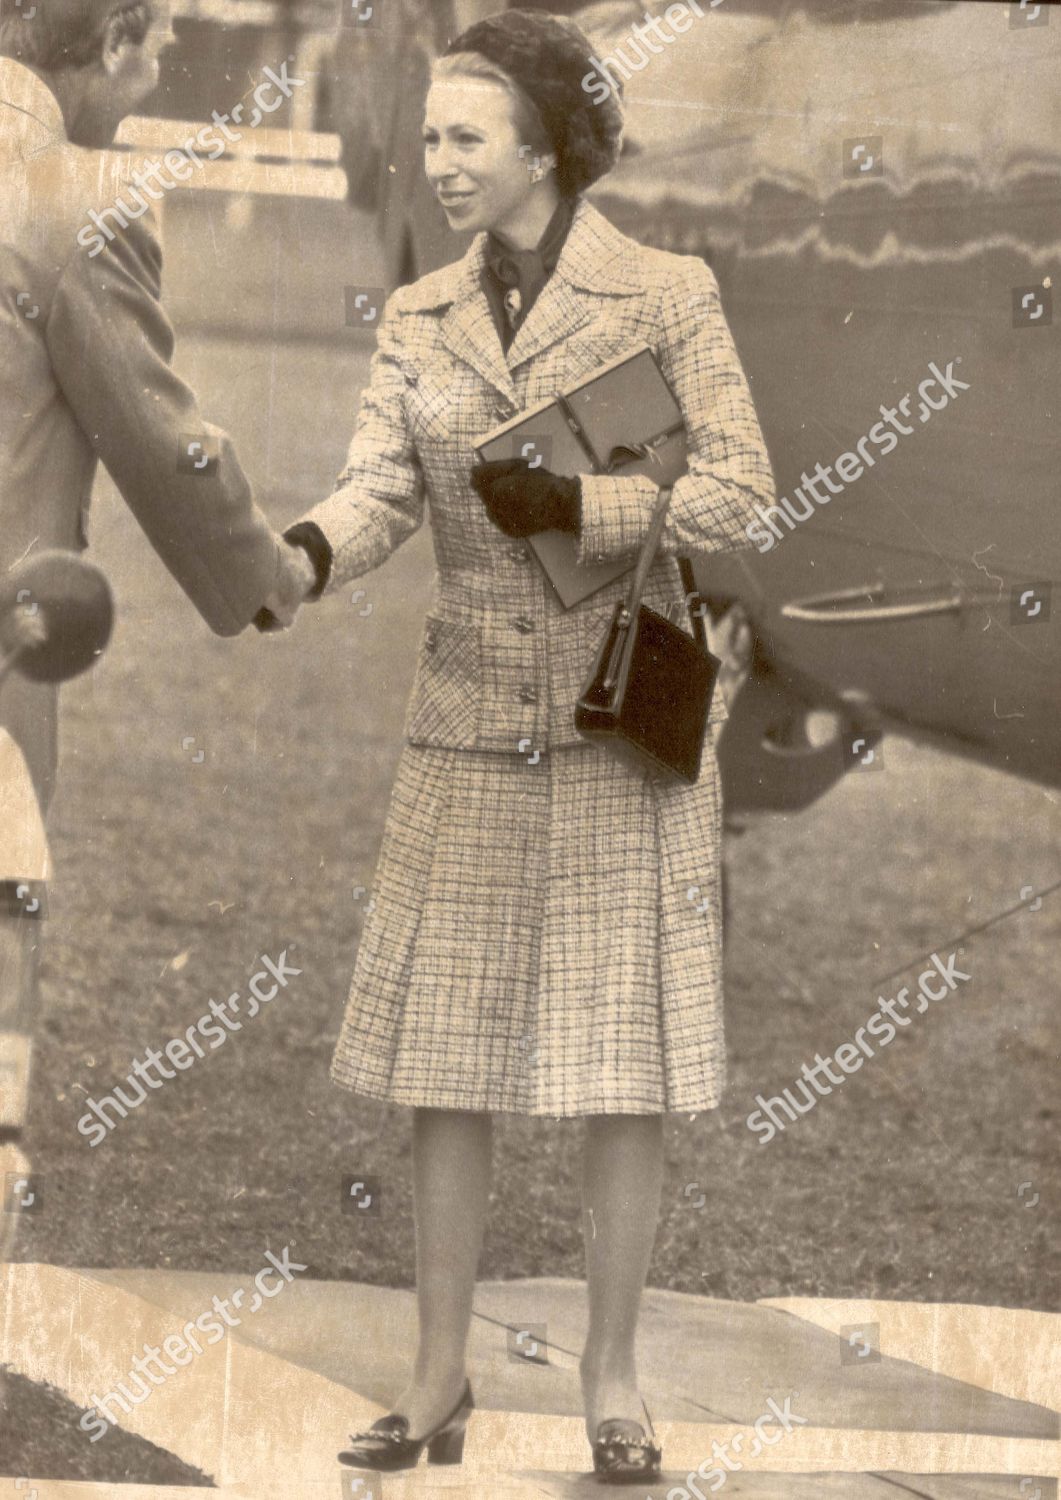 princess-anne-now-princess-royal-november-1975-despite-drizzle-princess-anne-looking-chic-in-two-piece-outfit-at-stoneleigh-the-national-equestrian-centre-royalty-shutterstock-editorial-891736a.jpg